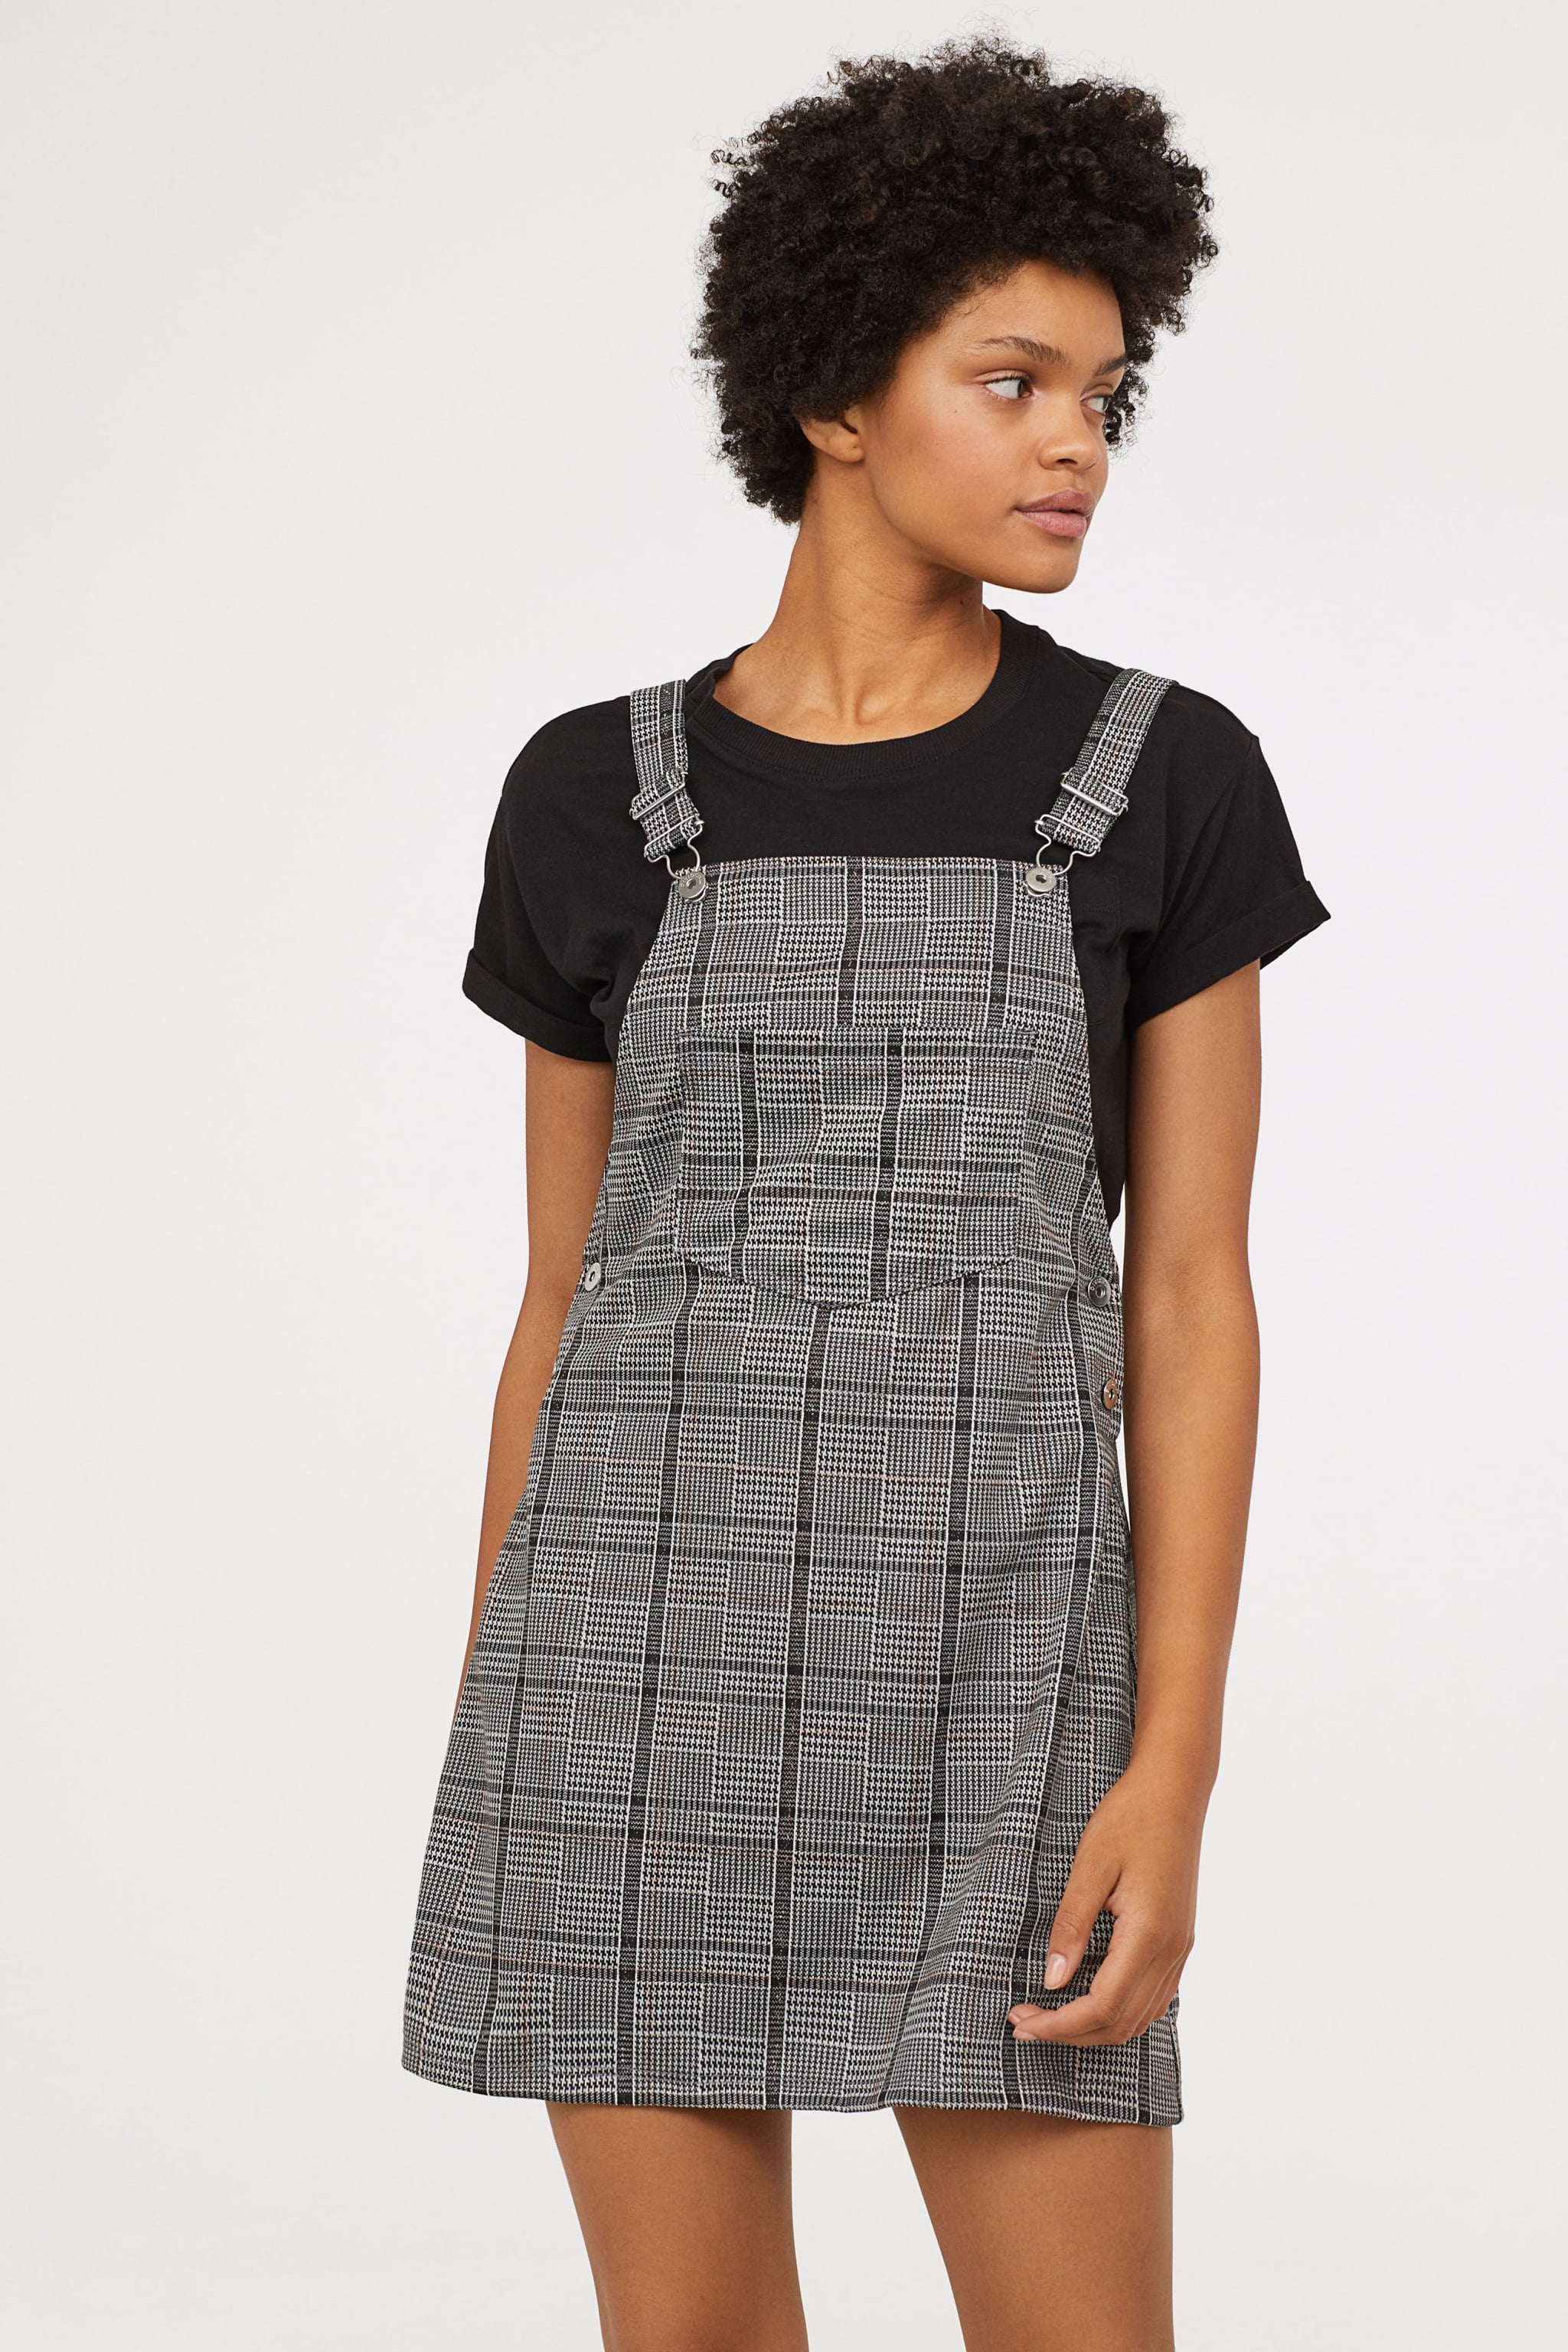 h&m overall dress